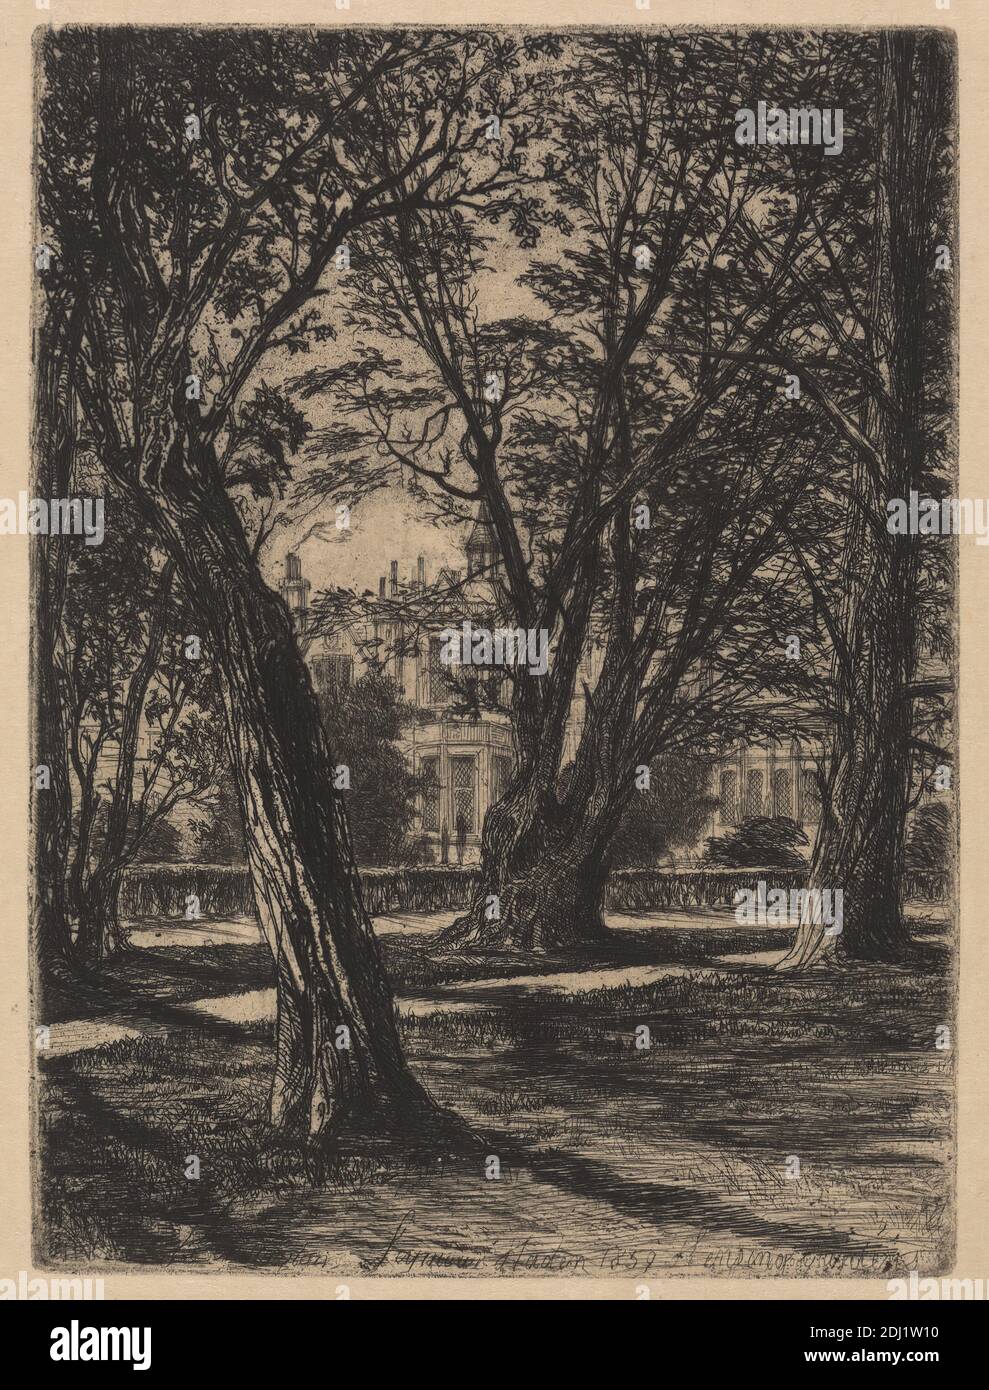 Kensington Gardens, no. 1 (small plate), Francis Seymour Haden, 1818–1910, British, 1859, Etching and drypoint, with plate tone on medium, smooth, cream Asian paper, Sheet: 8 1/8 x 5 13/16 inches (20.6 x 14.7 cm), Plate: 6 1/4 x 4 5/8 inches (15.9 x 11.8 cm), and Image: 6 1/4 x 4 5/8 inches (15.9 x 11.8 cm), architectural subject, building, chimneys, cityscape, garden, grass, hedge, house, landscape, lawn, palace, path, shadows, trees, turret, windows, England, Europe, Hyde Park, Kensington, Kensington Gardens, London, United Kingdom Stock Photo